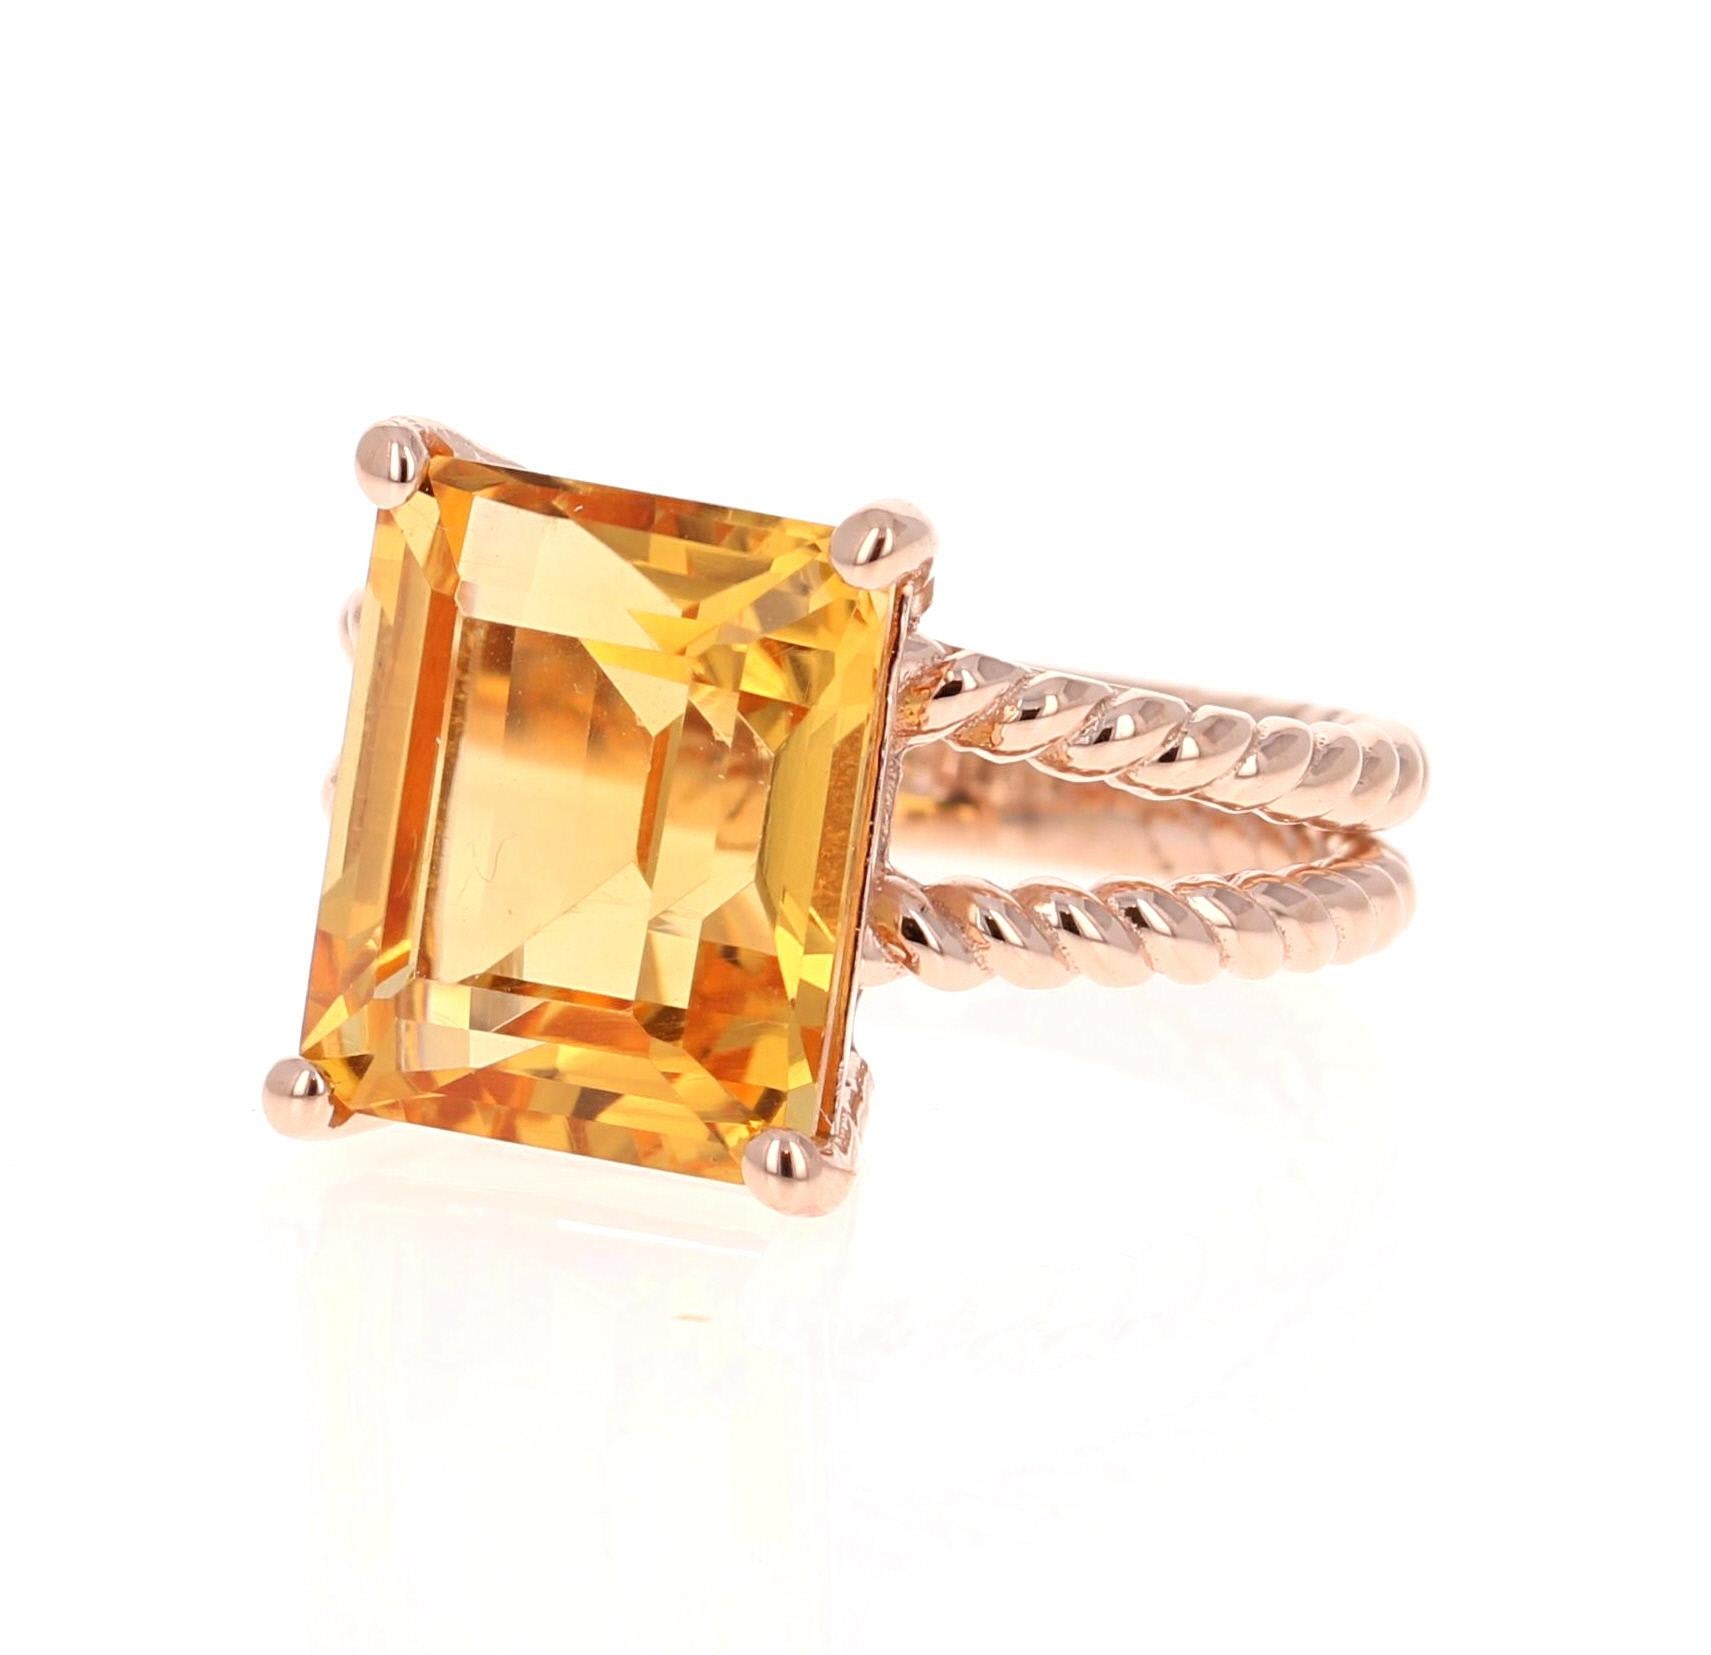 This beautiful, designer inspired ring has a bright and vivid Emerald Cut Citrine Quartz in the center that weighs 6.45 carats. 
The setting is beautifully crafted in 14K Rose Gold and weighs approximately 5.3 grams.
The ring is a size 7 and can be